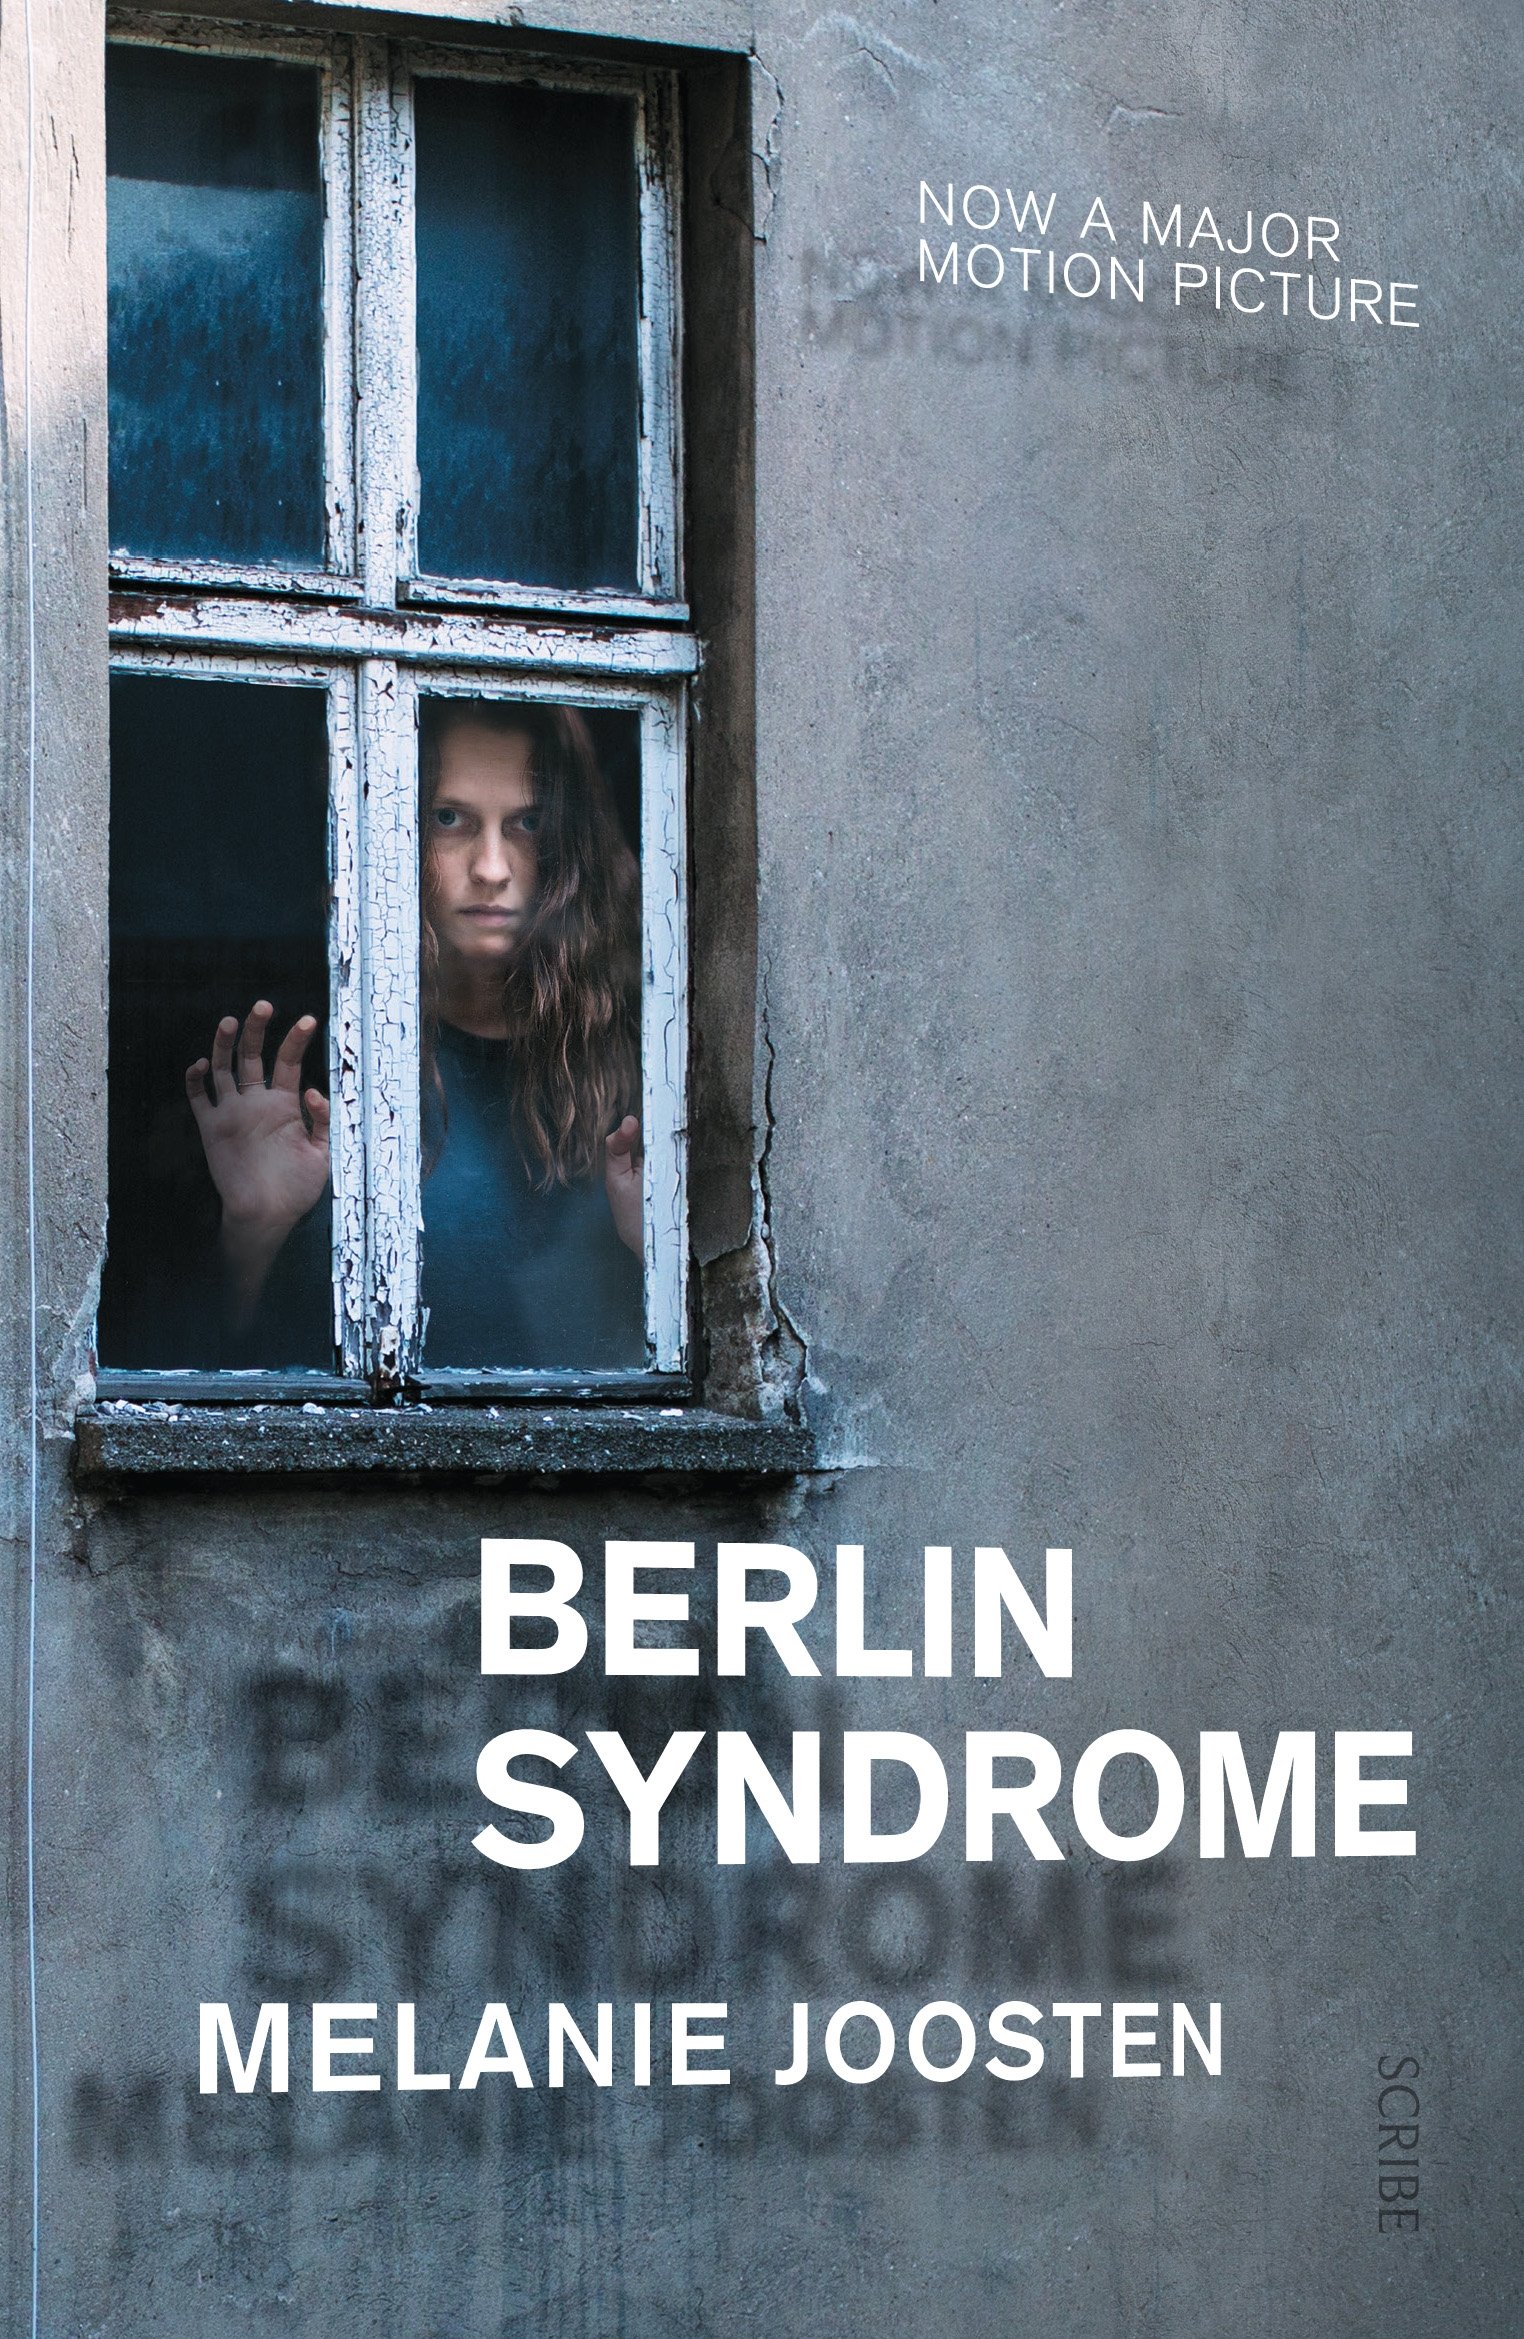 Berlin Syndrome (2017) Main Poster